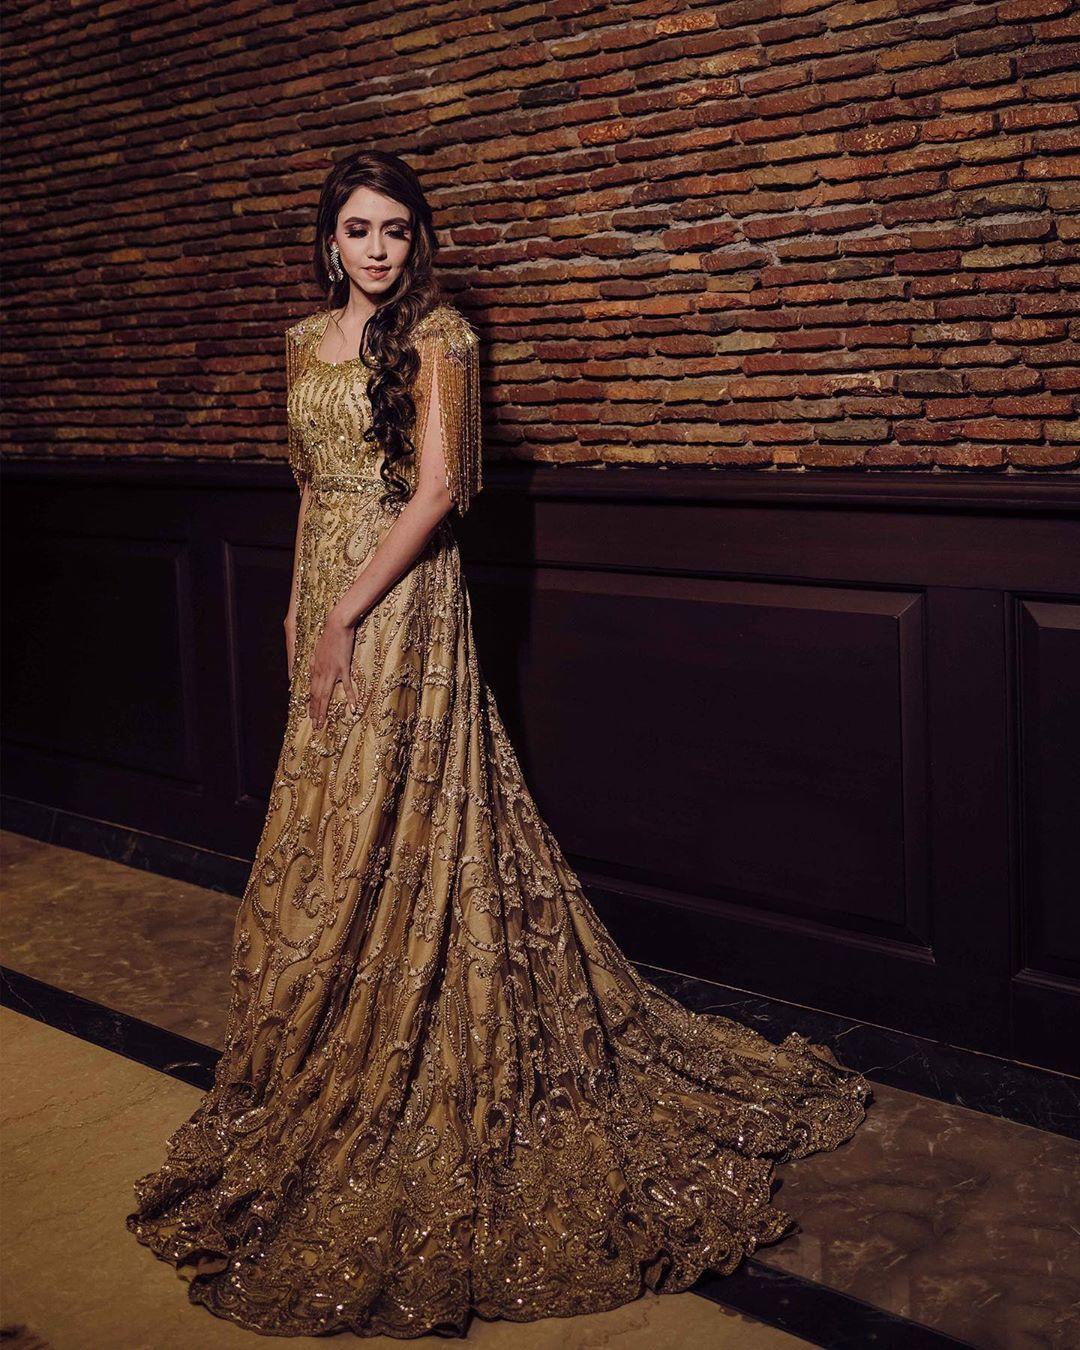 Indian weddings with experimental brides carry new opportunity for luxury |  Vogue India